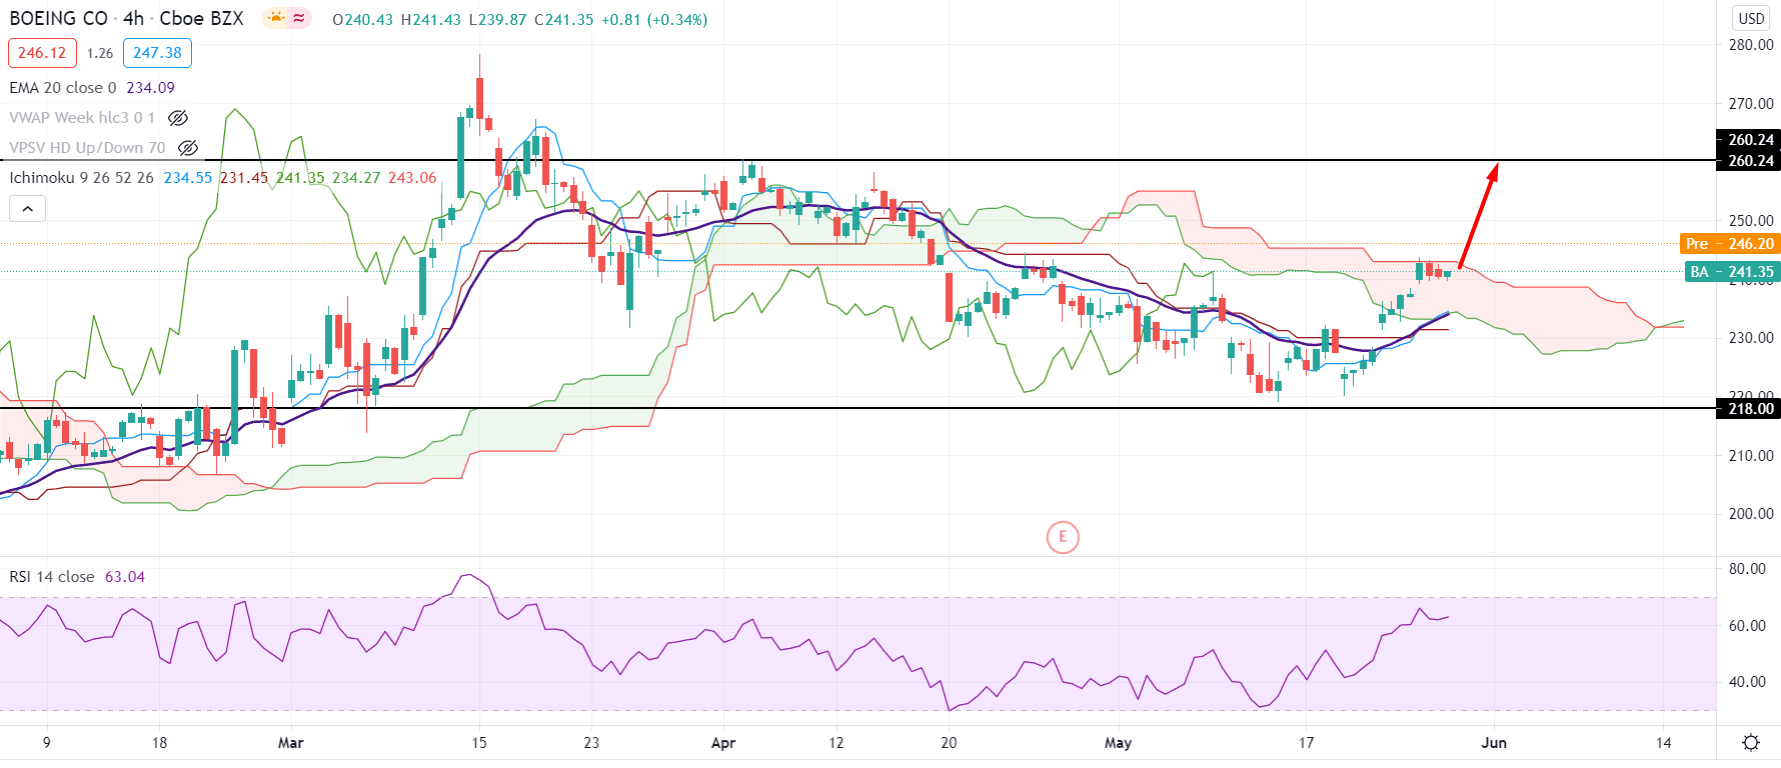 Boeing Stock H4 Technical Analysis 26 May 2021